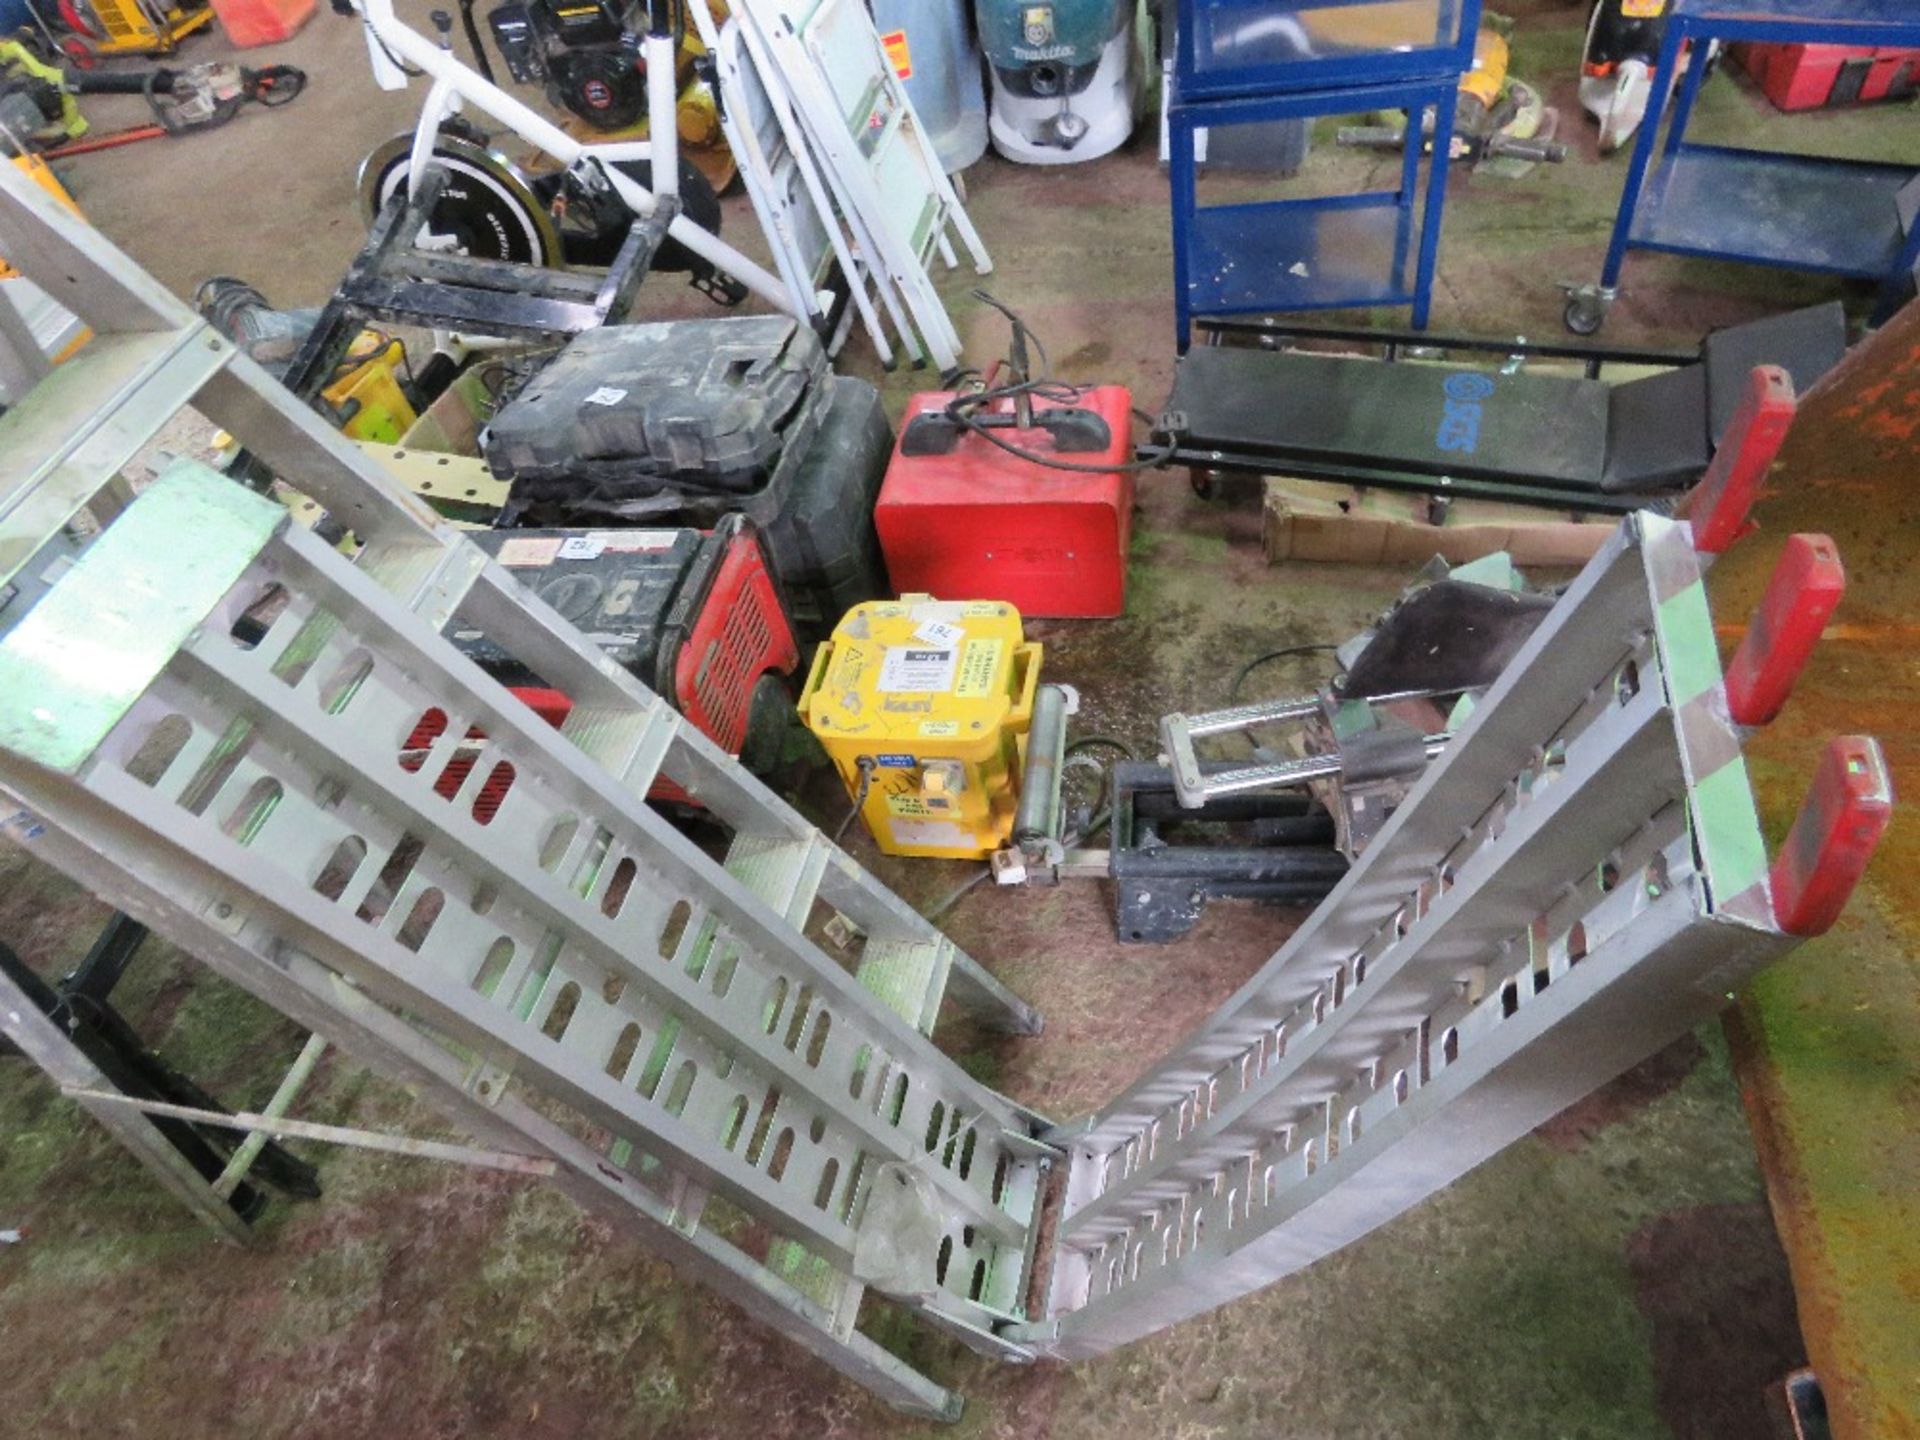 ALUMINIUM STEPS AND A FOLDING ALUMINIUM RAMP. OWNER RETIRING AND EMMIGRATING. THIS LOT IS SOLD UND - Image 3 of 4